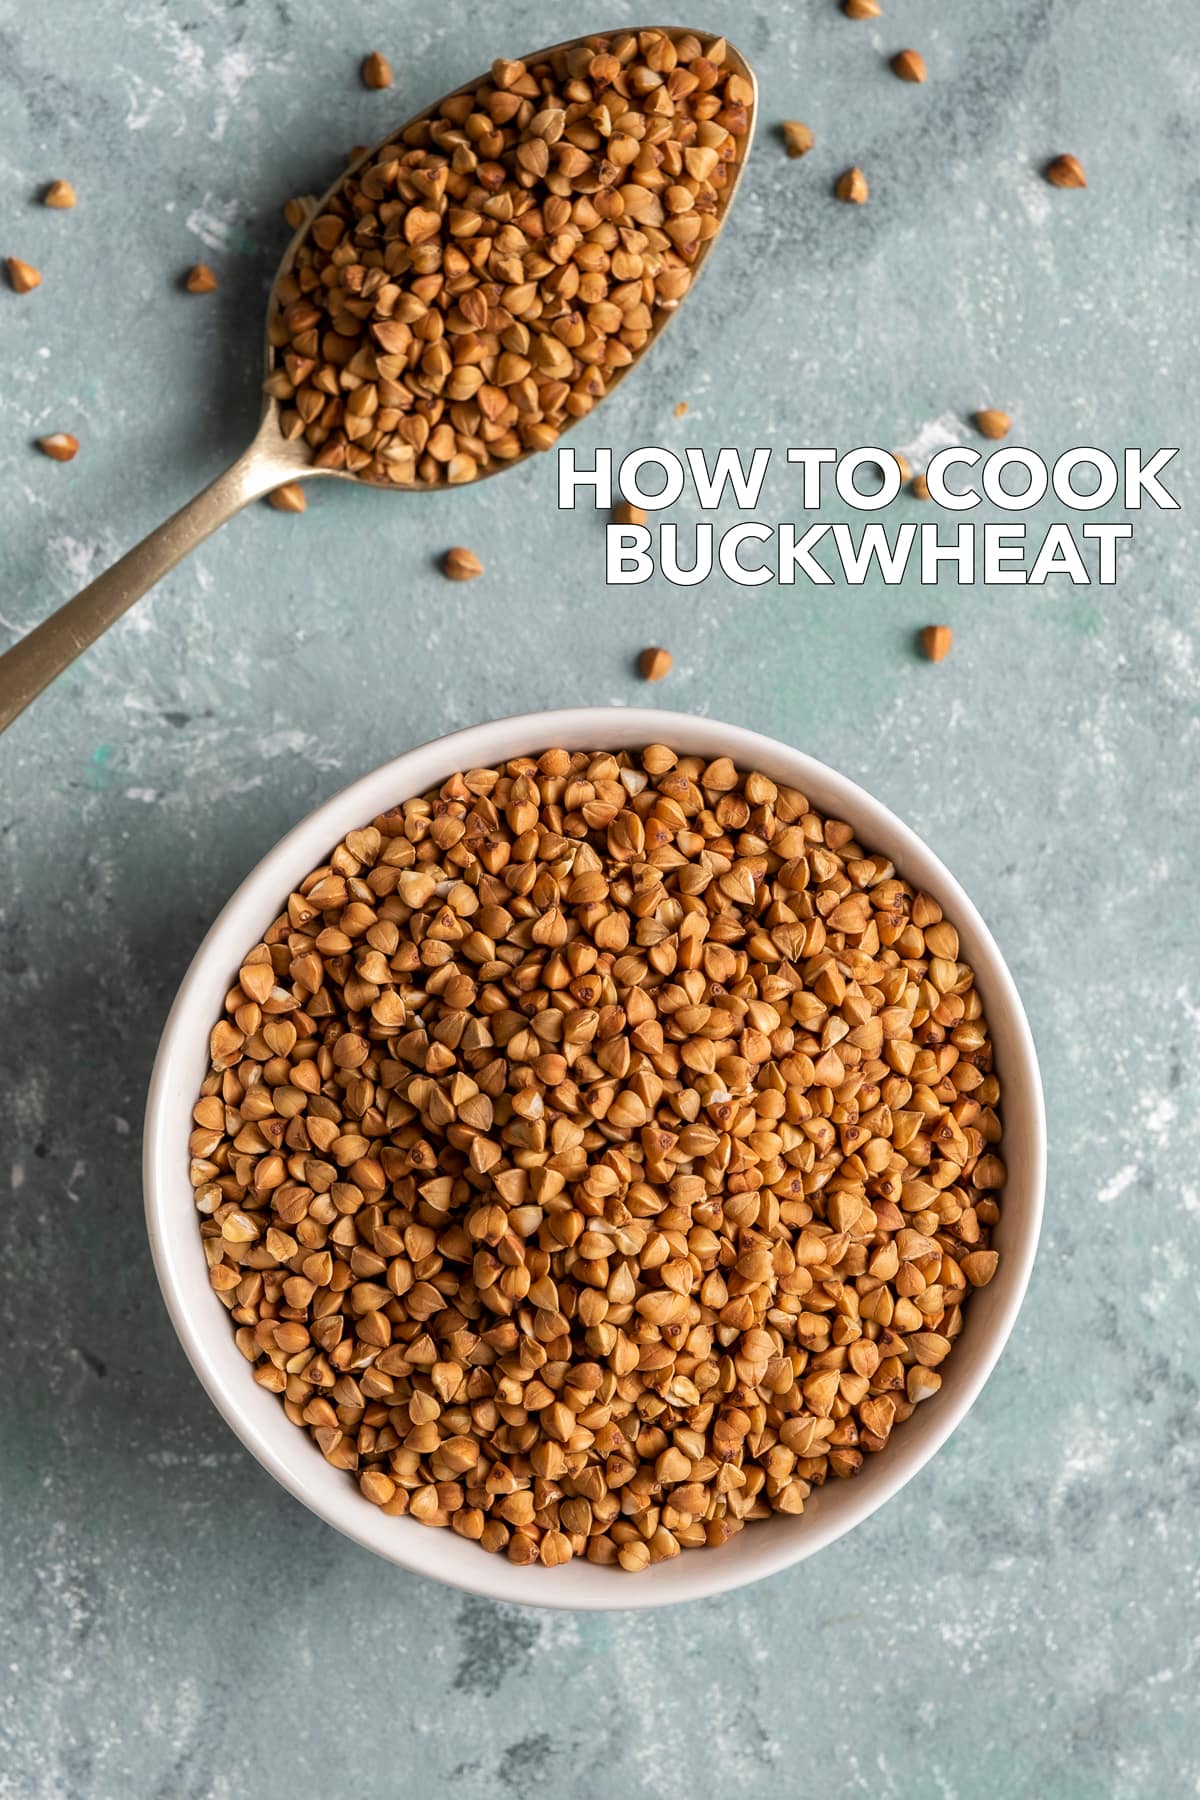 Roasted buckwheat in a bowl and a spoon full of buckwheat on the side on a light background.